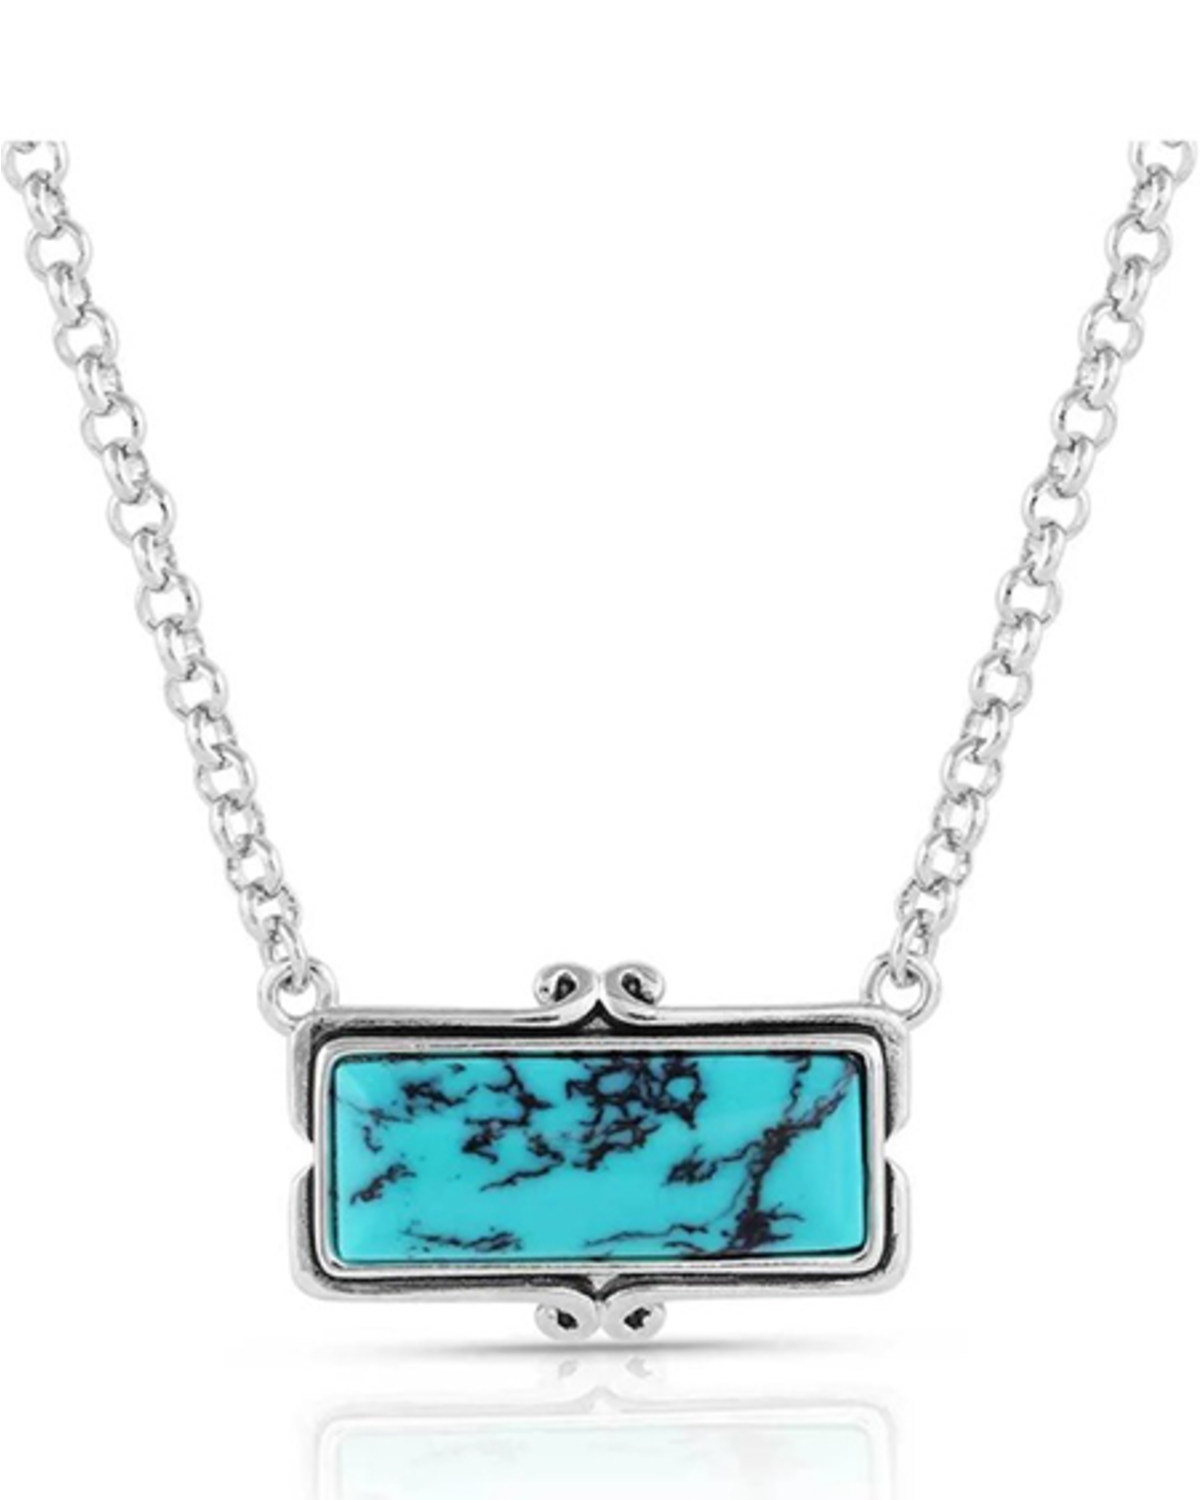 Montana Silversmiths Women's Looking Glass Turquoise Necklace